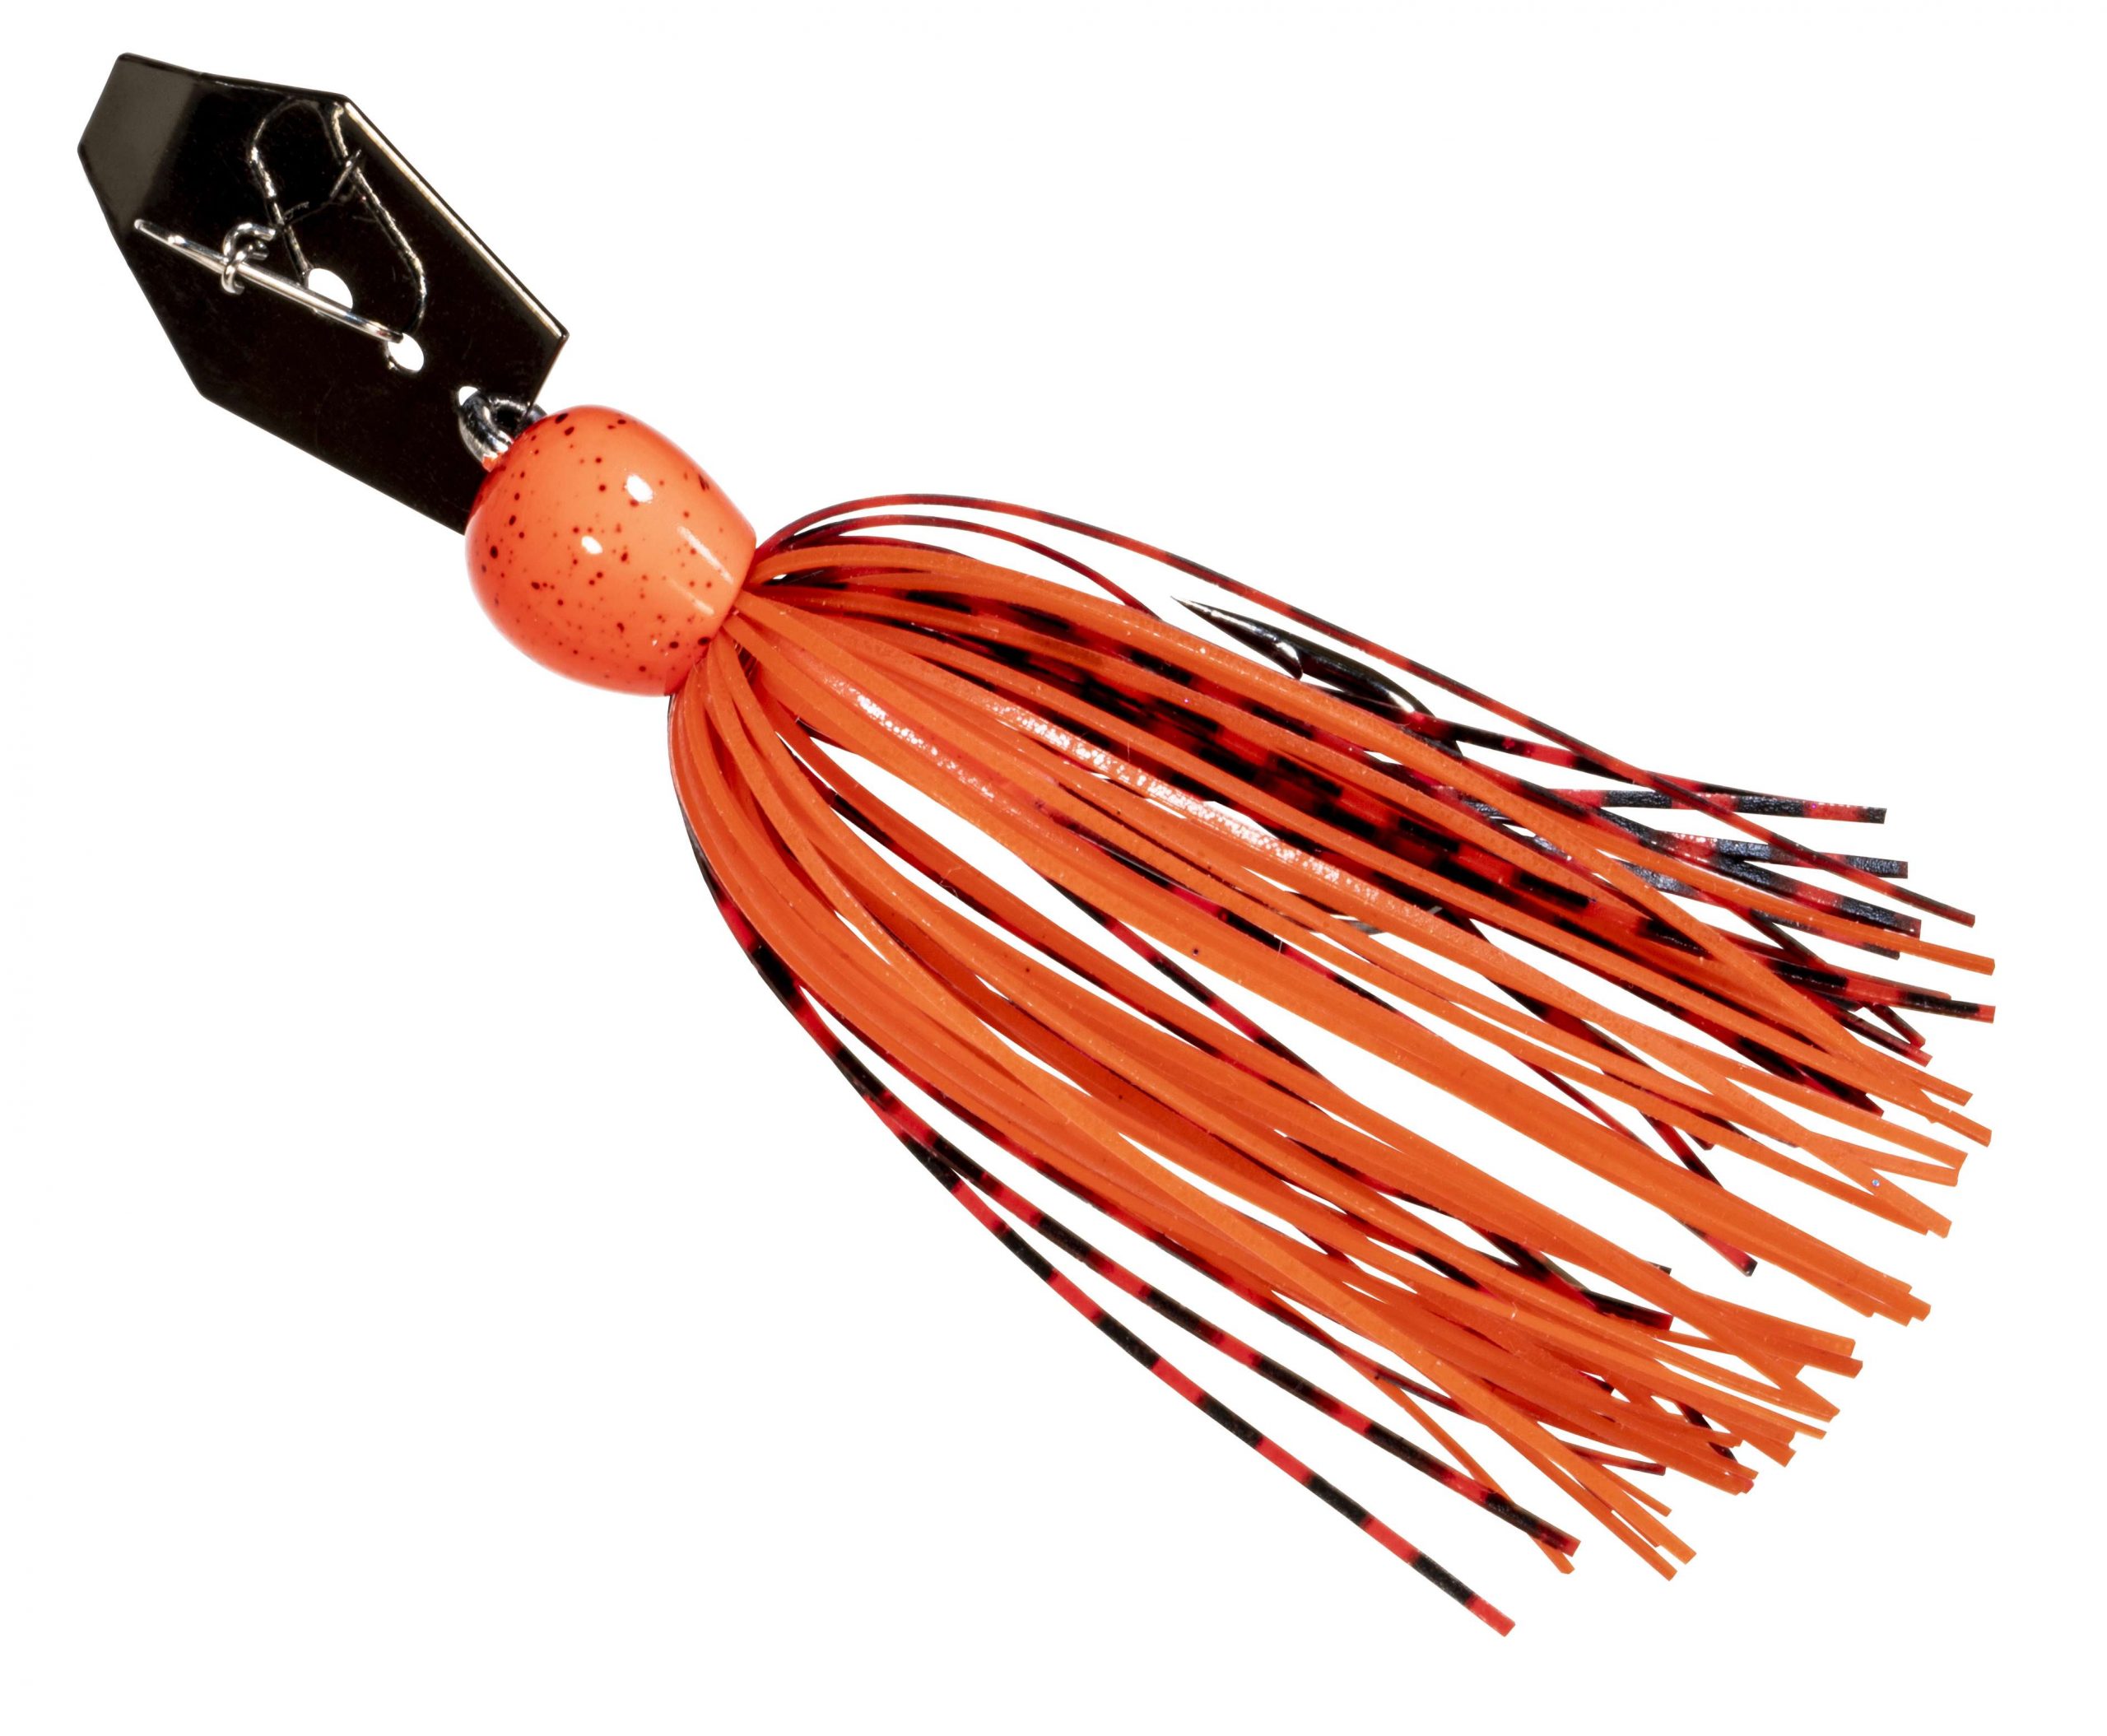 Fire Craw patterned-baits continue their hot streak with the new ChatterBait MiniMax by Z-Man Fishing.